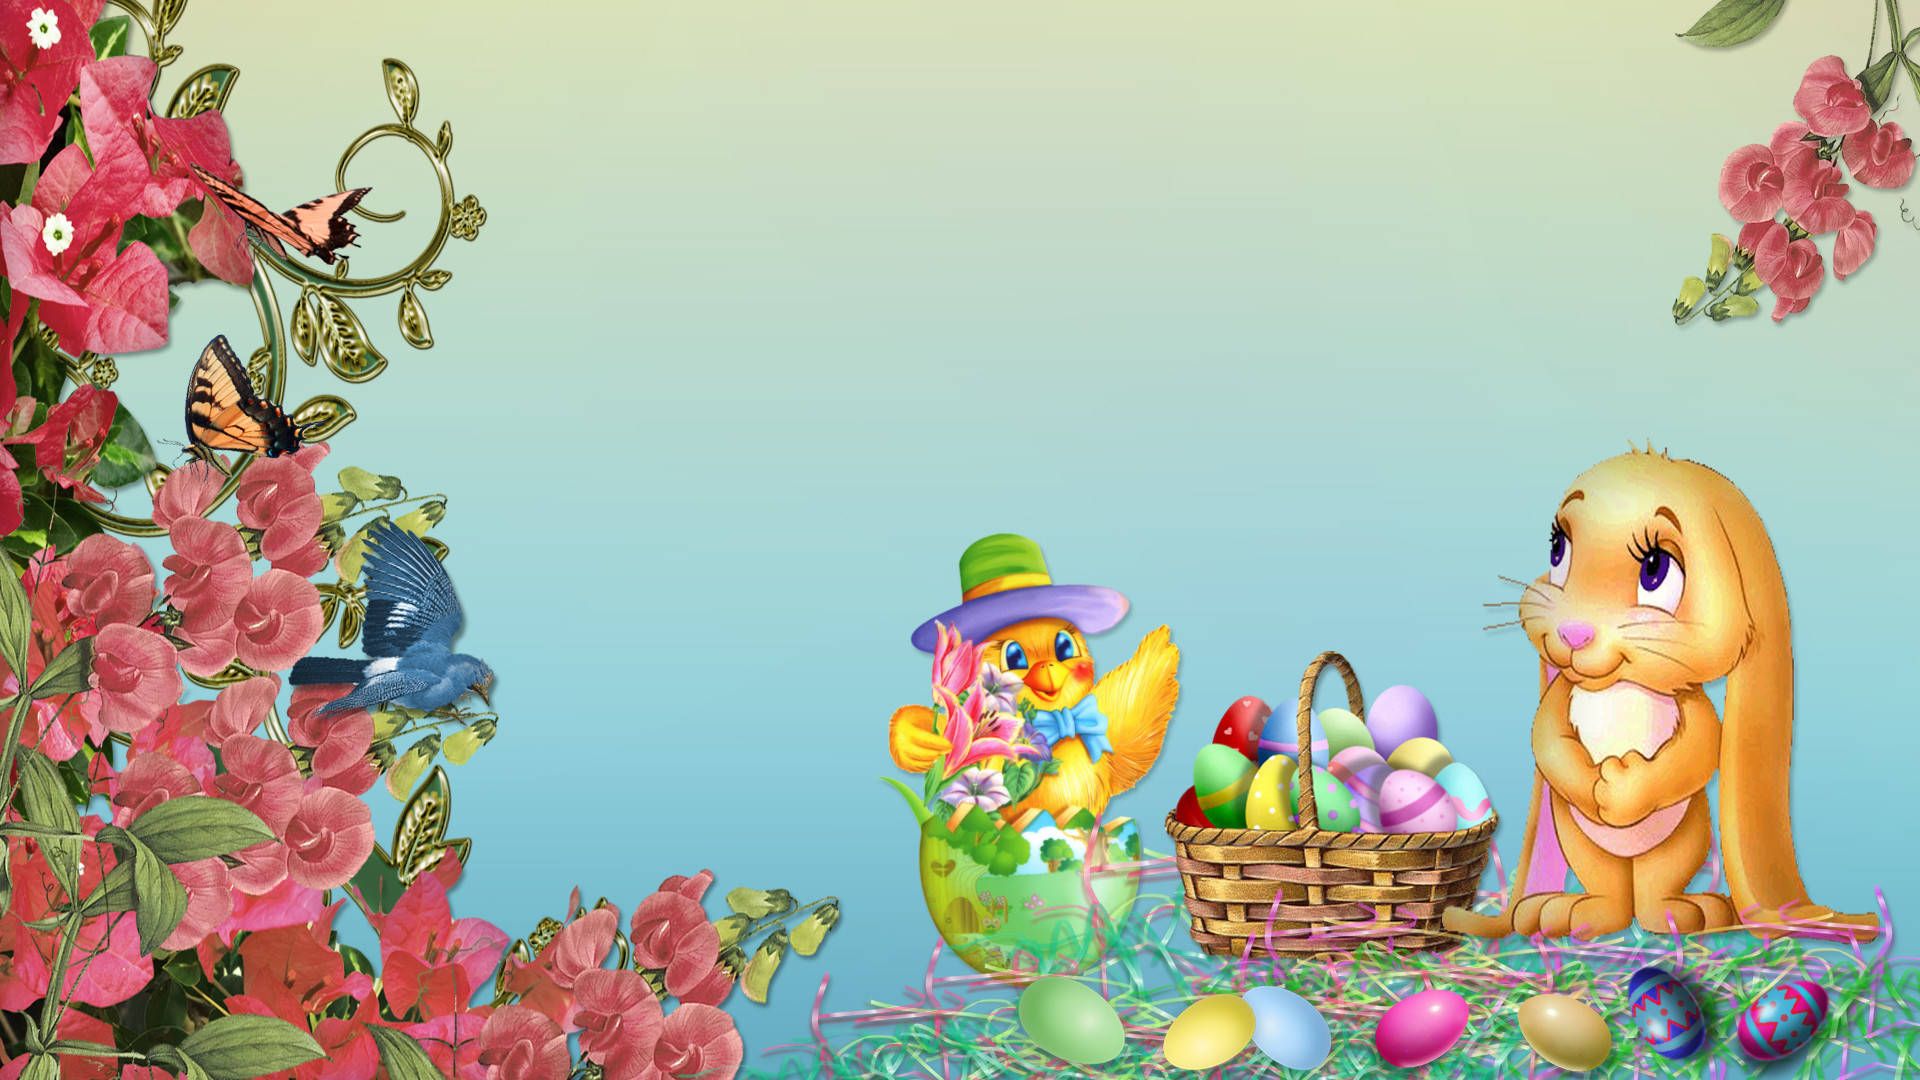 Happy Easter Bunny And Chicks Cartoon With Eggs Background